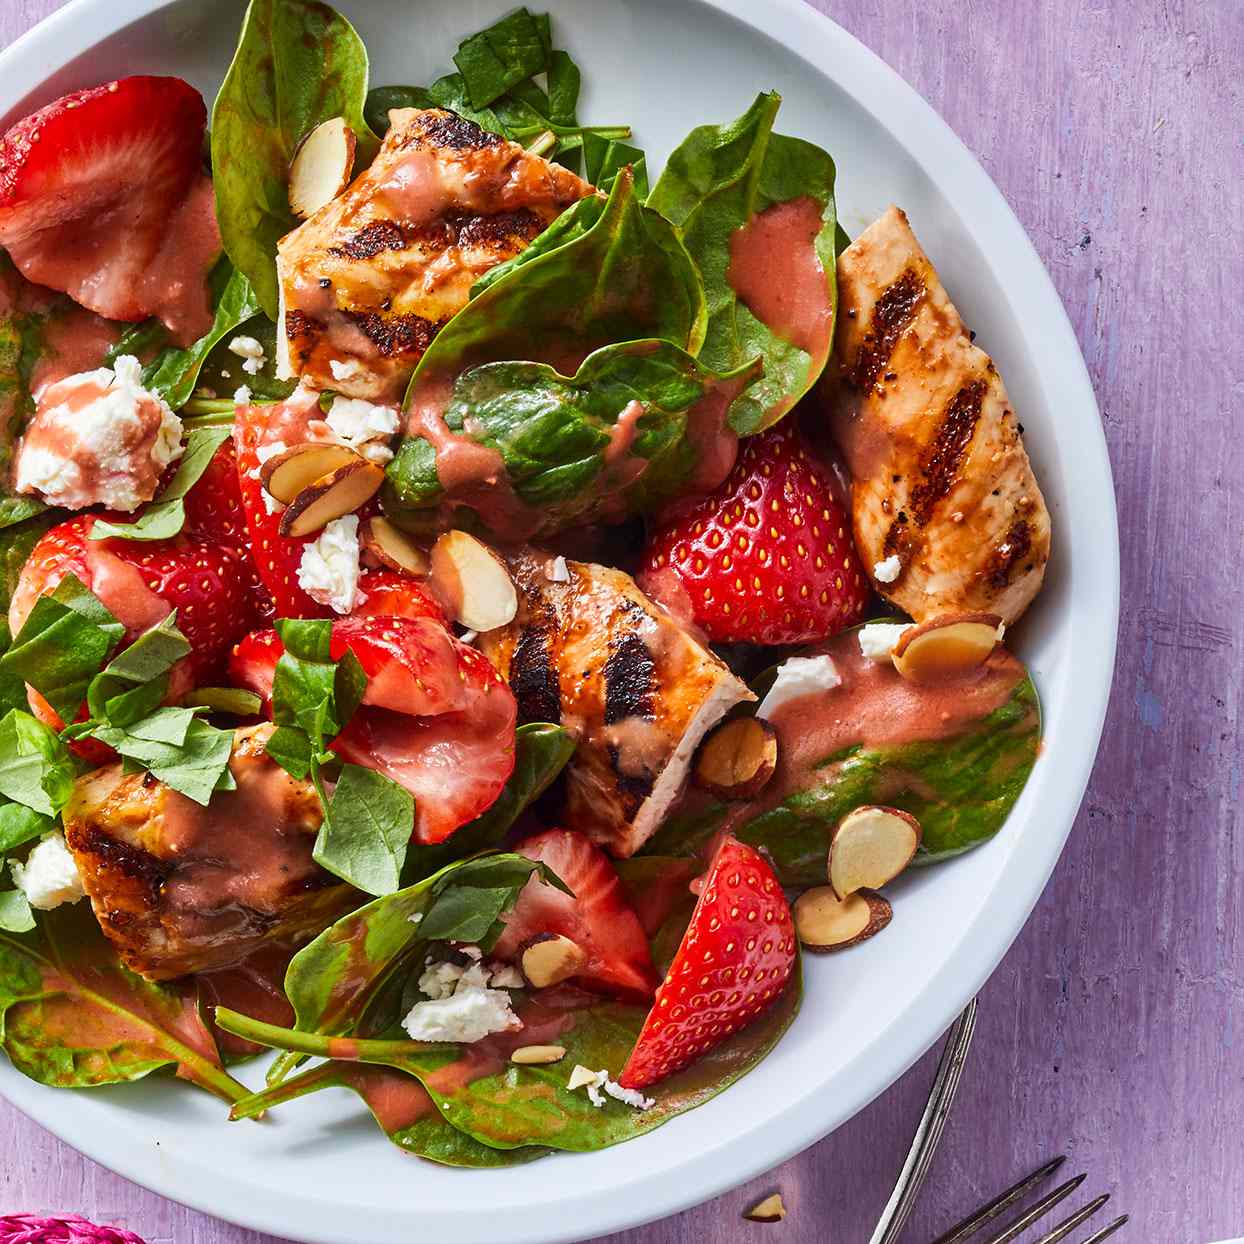 Strawberry-Balsamic Spinach Salad with Chicken